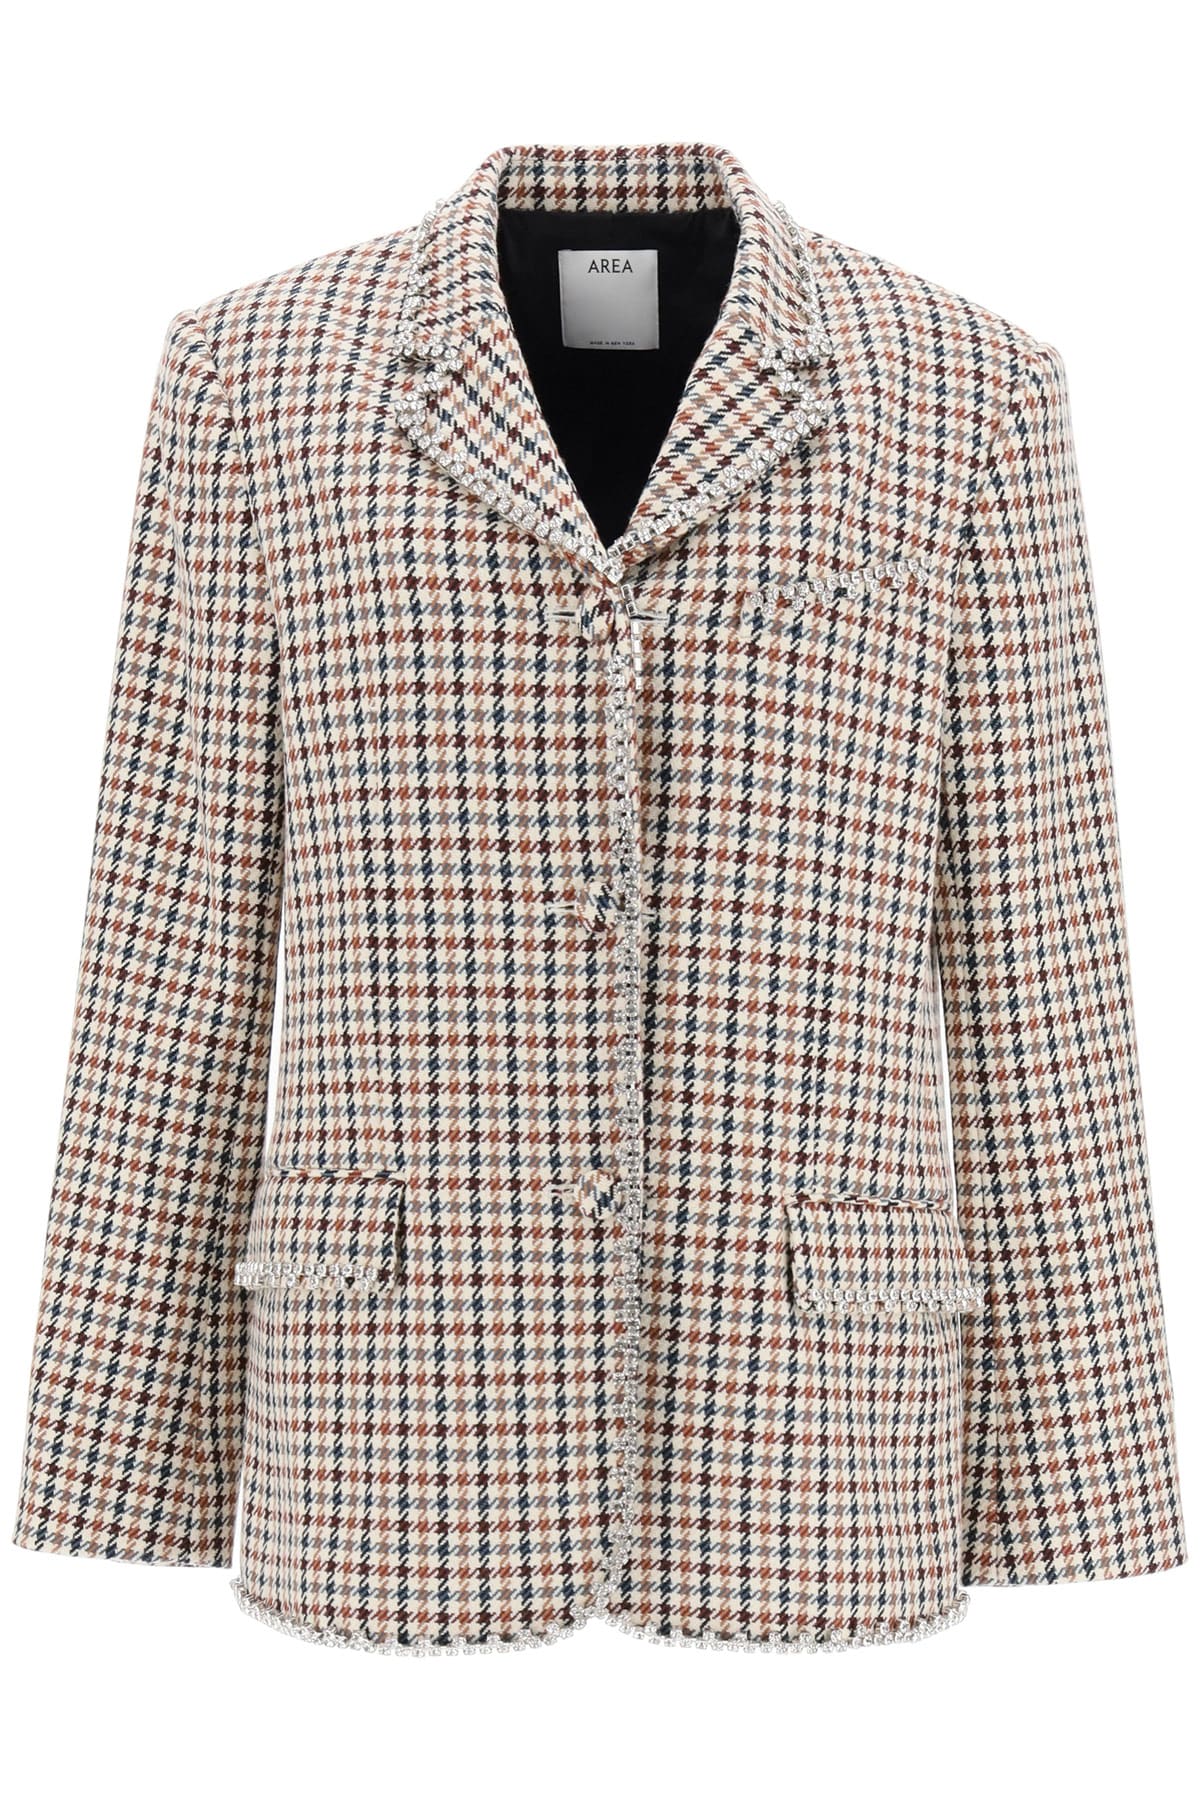 AREA Houndstooth Blazer With Crystals